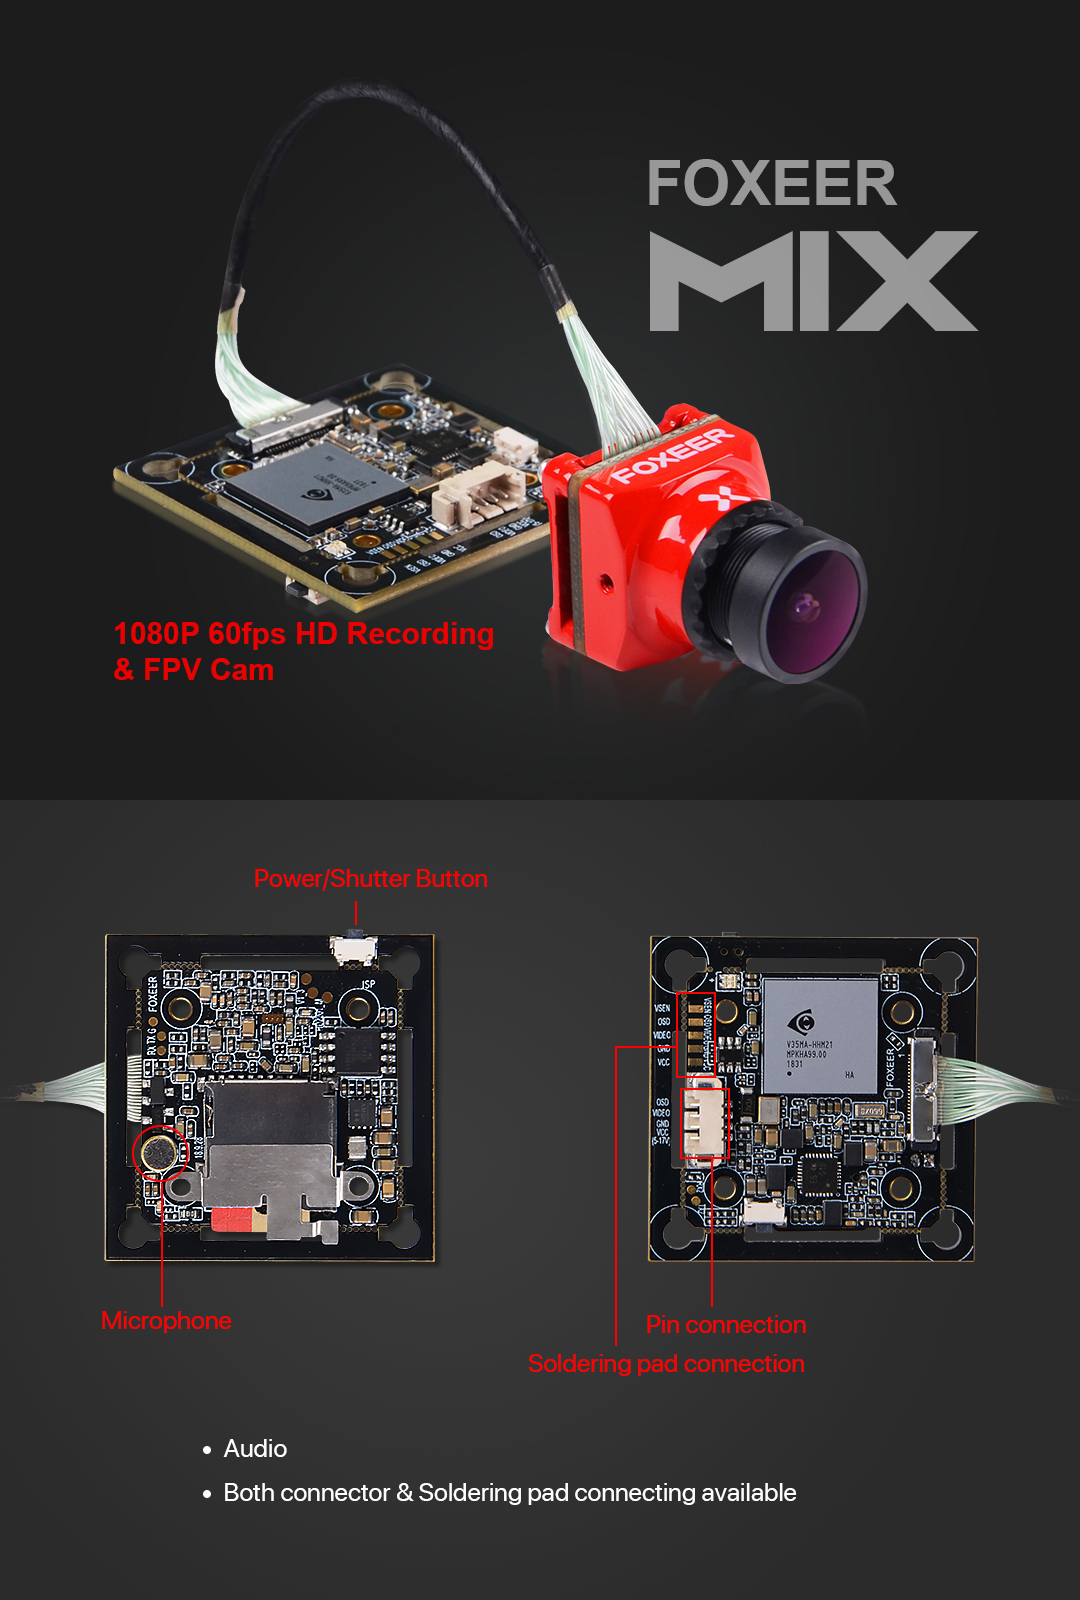 Foxeer Mix 2 1080p 60fps Super WDR Mini HD FPV Camera (Pick Your Color) 12 - Foxeer